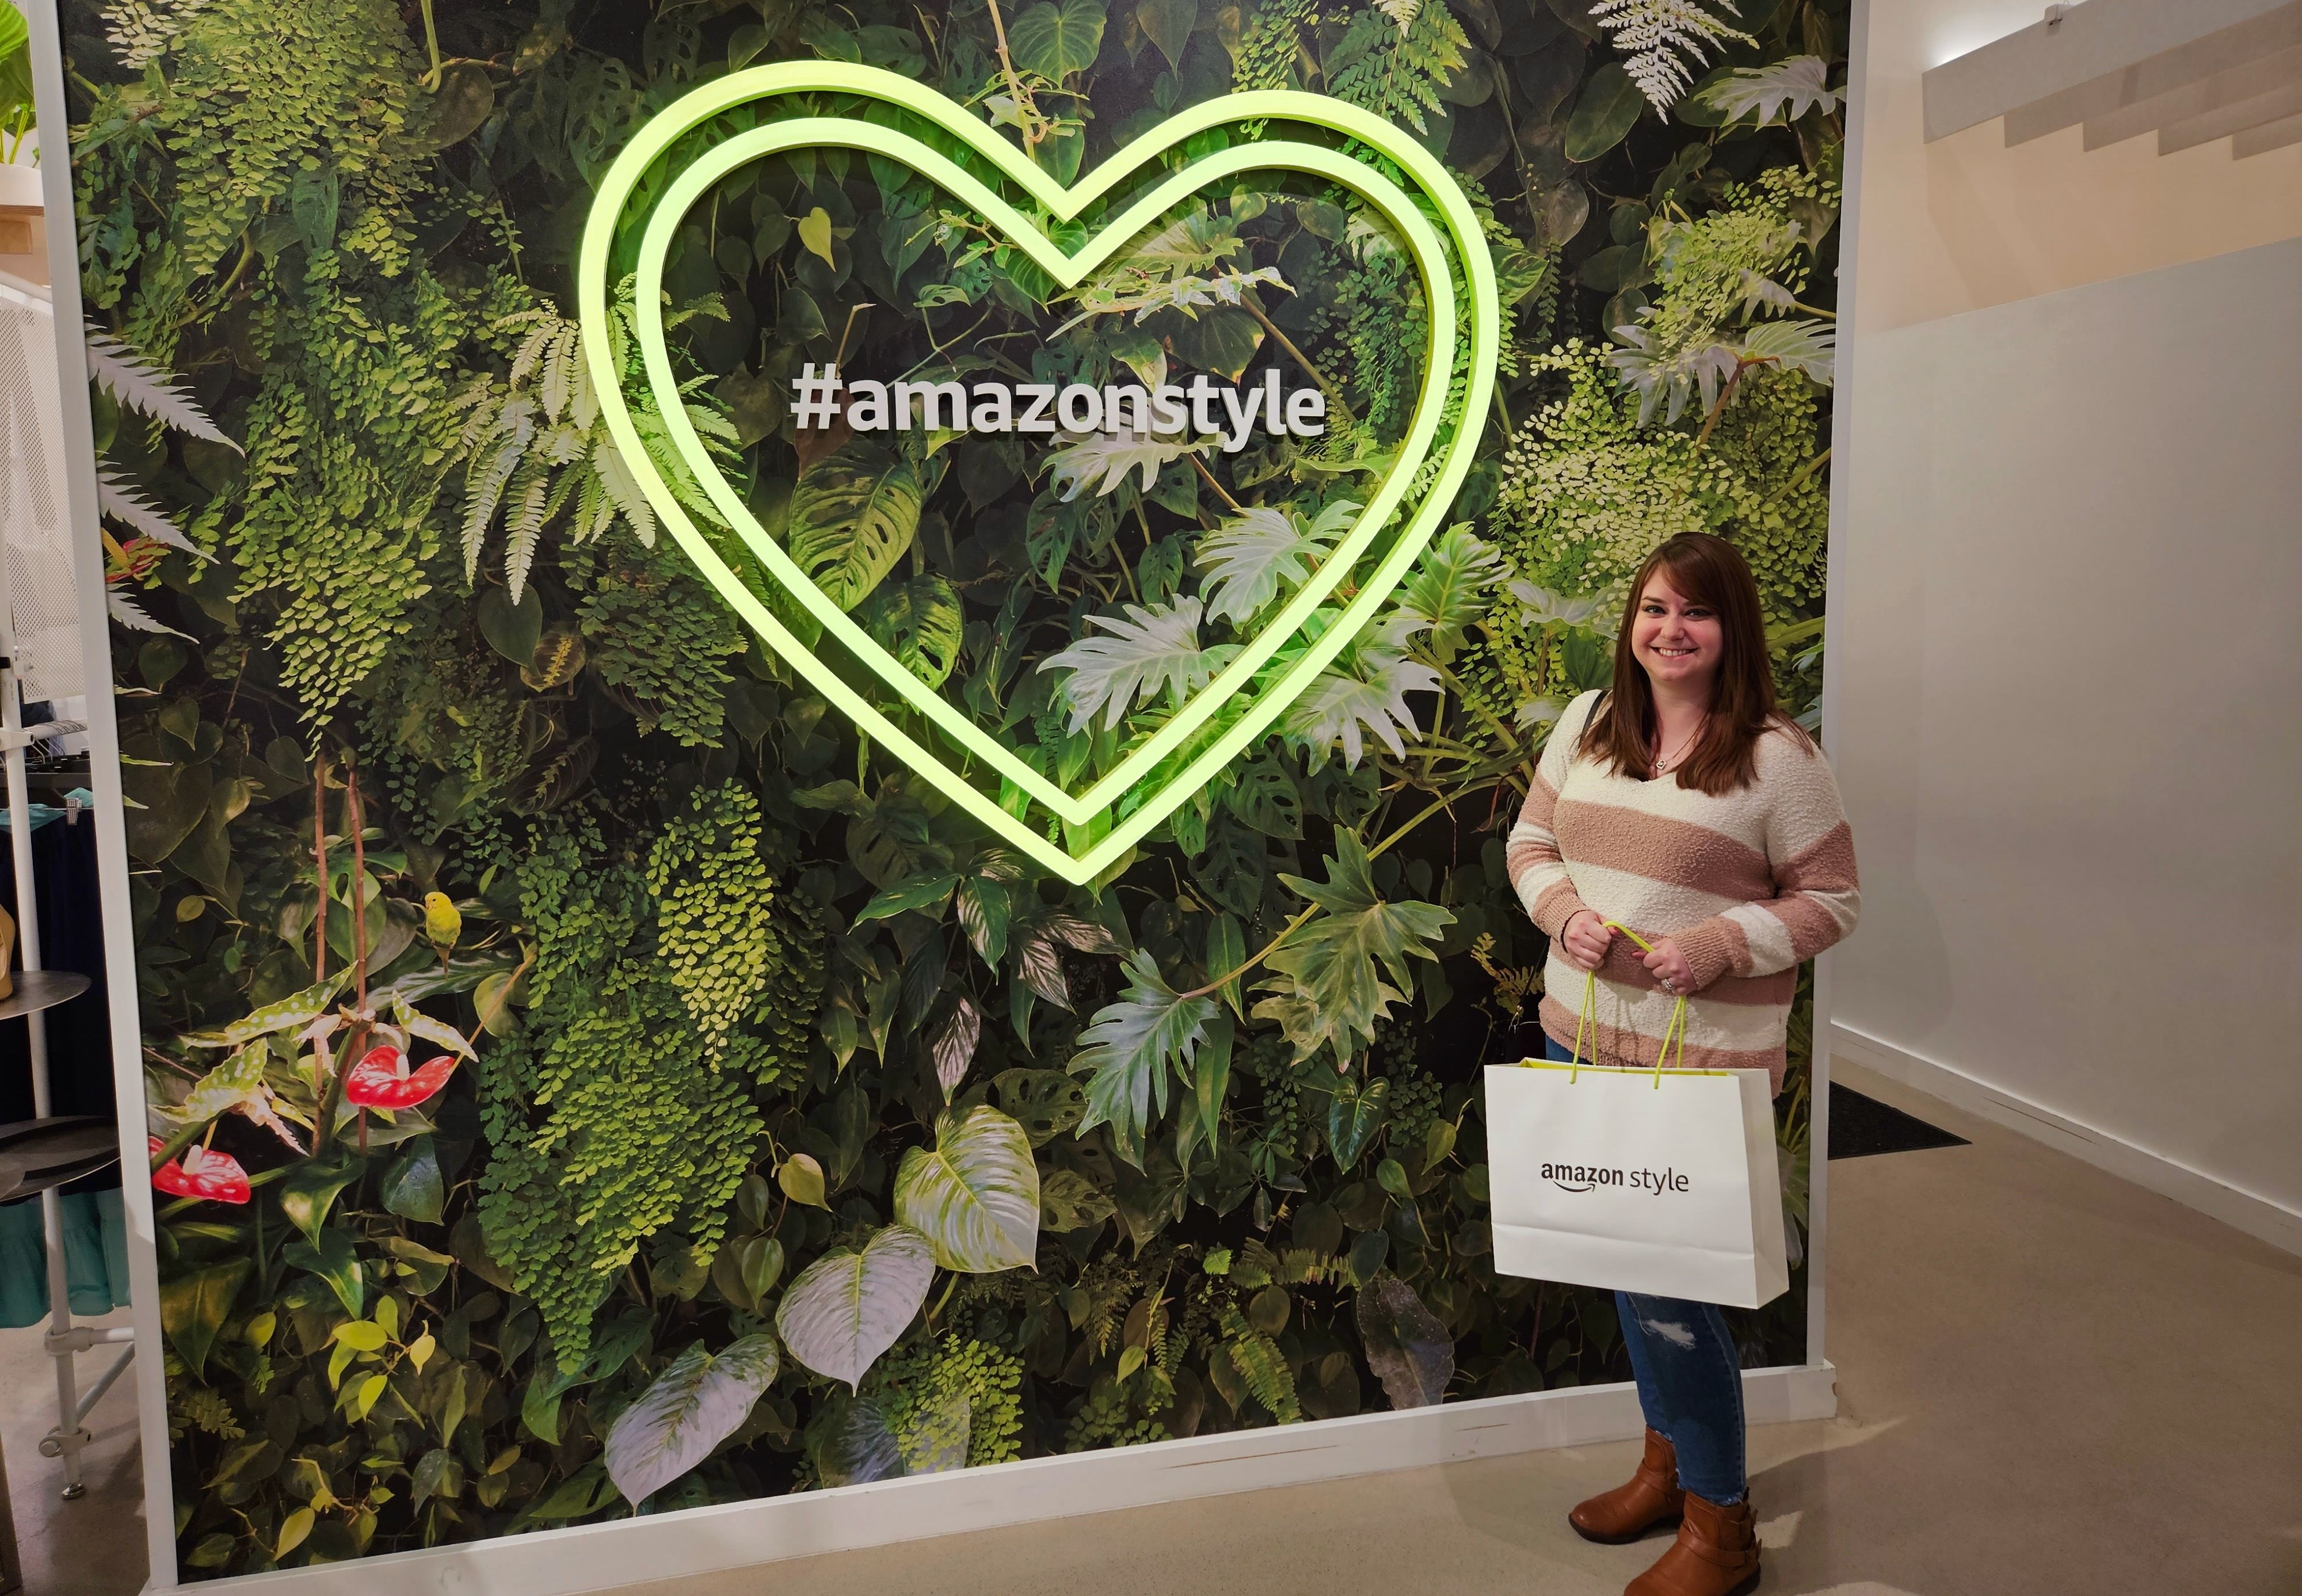 Alissa poses with a shopping bag next to a #amazonstyle sign with a neon heart light